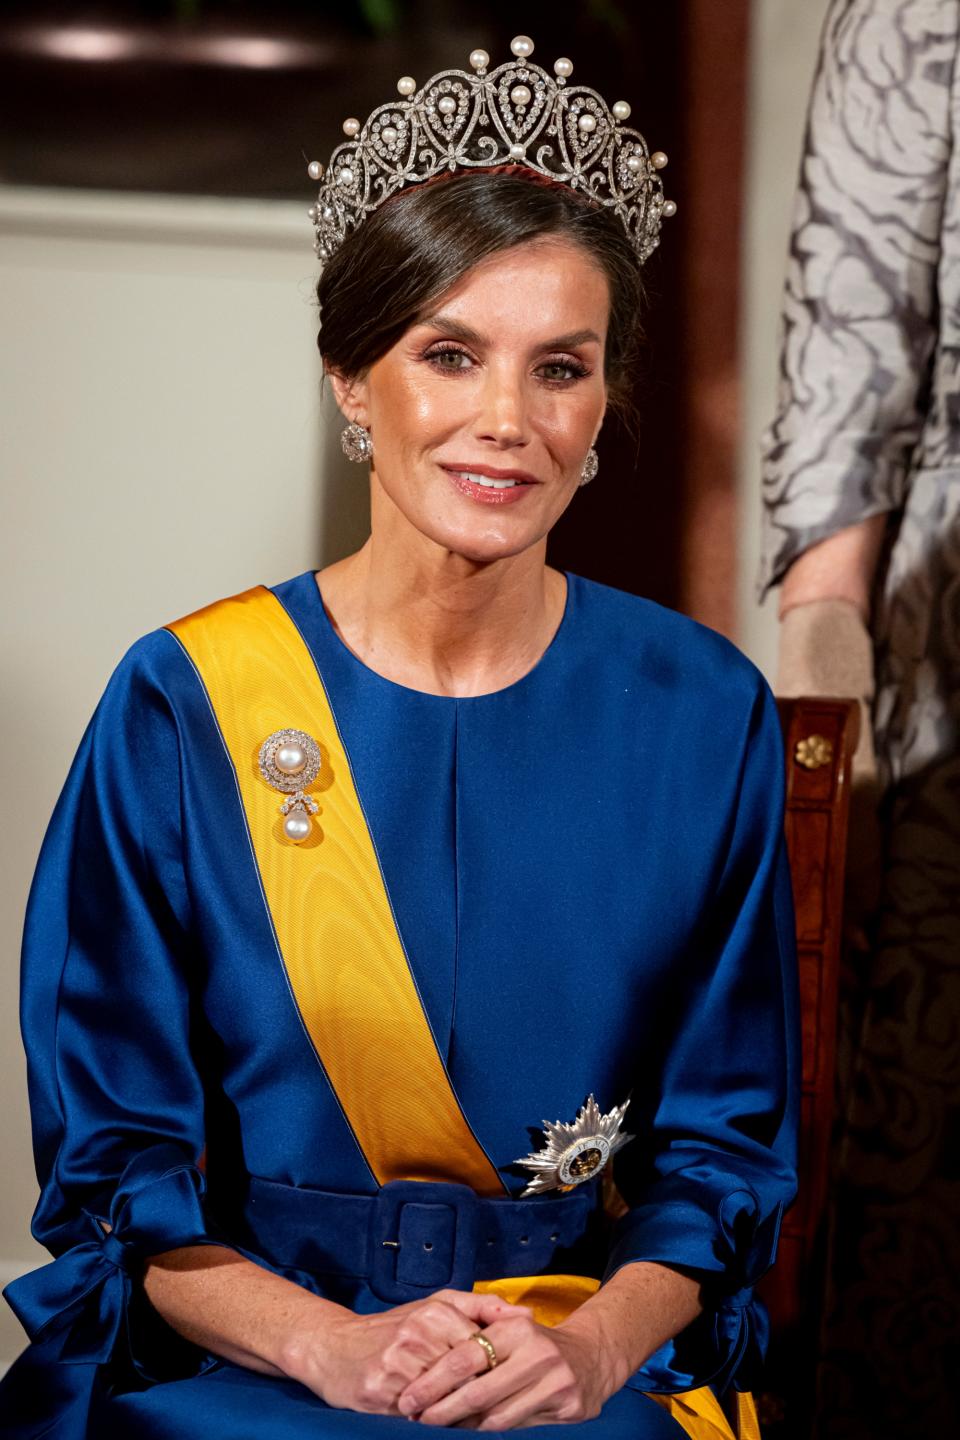 Queen Letizia at the state banquet at the Royal Palace in Amsterdam, Netherlands, on April 17.